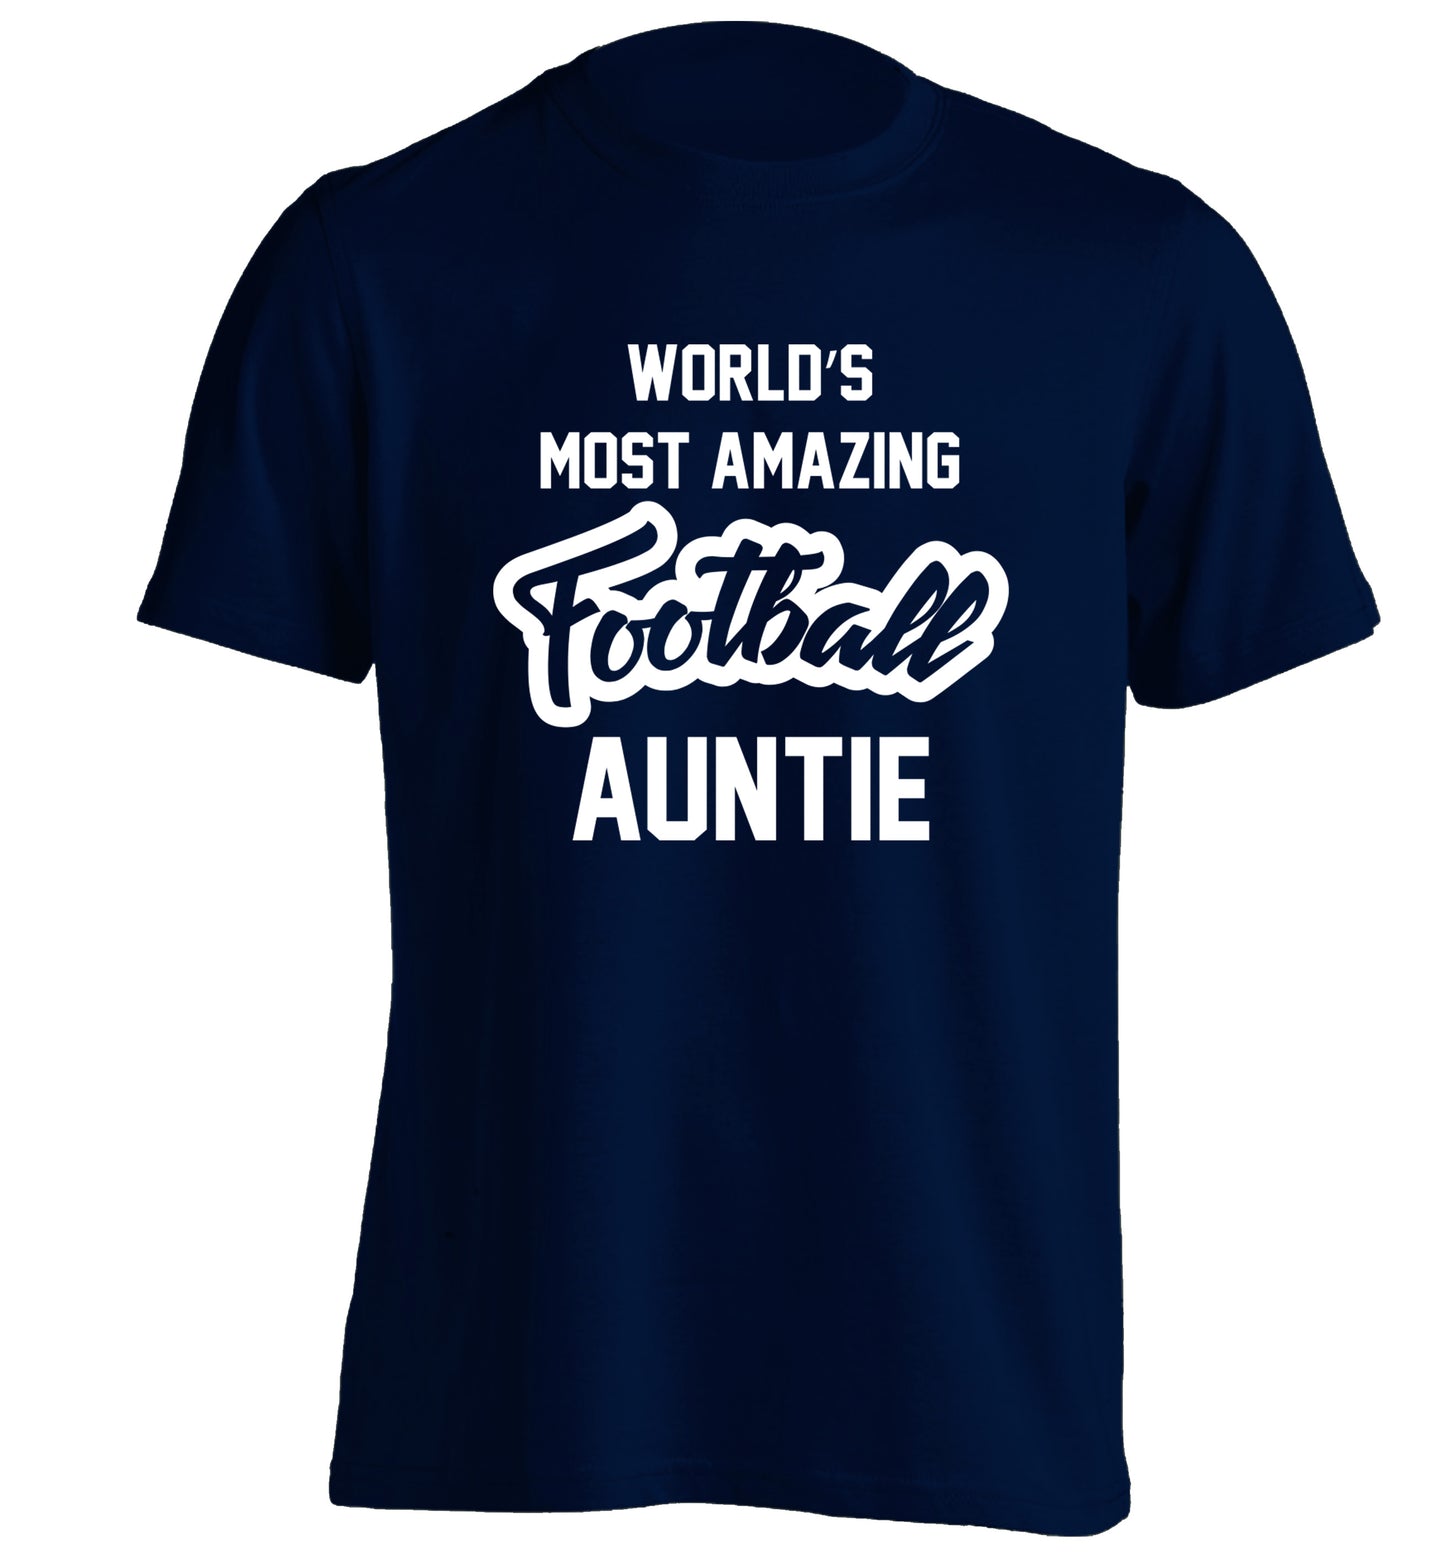 Worlds most amazing football auntie adults unisexnavy Tshirt 2XL